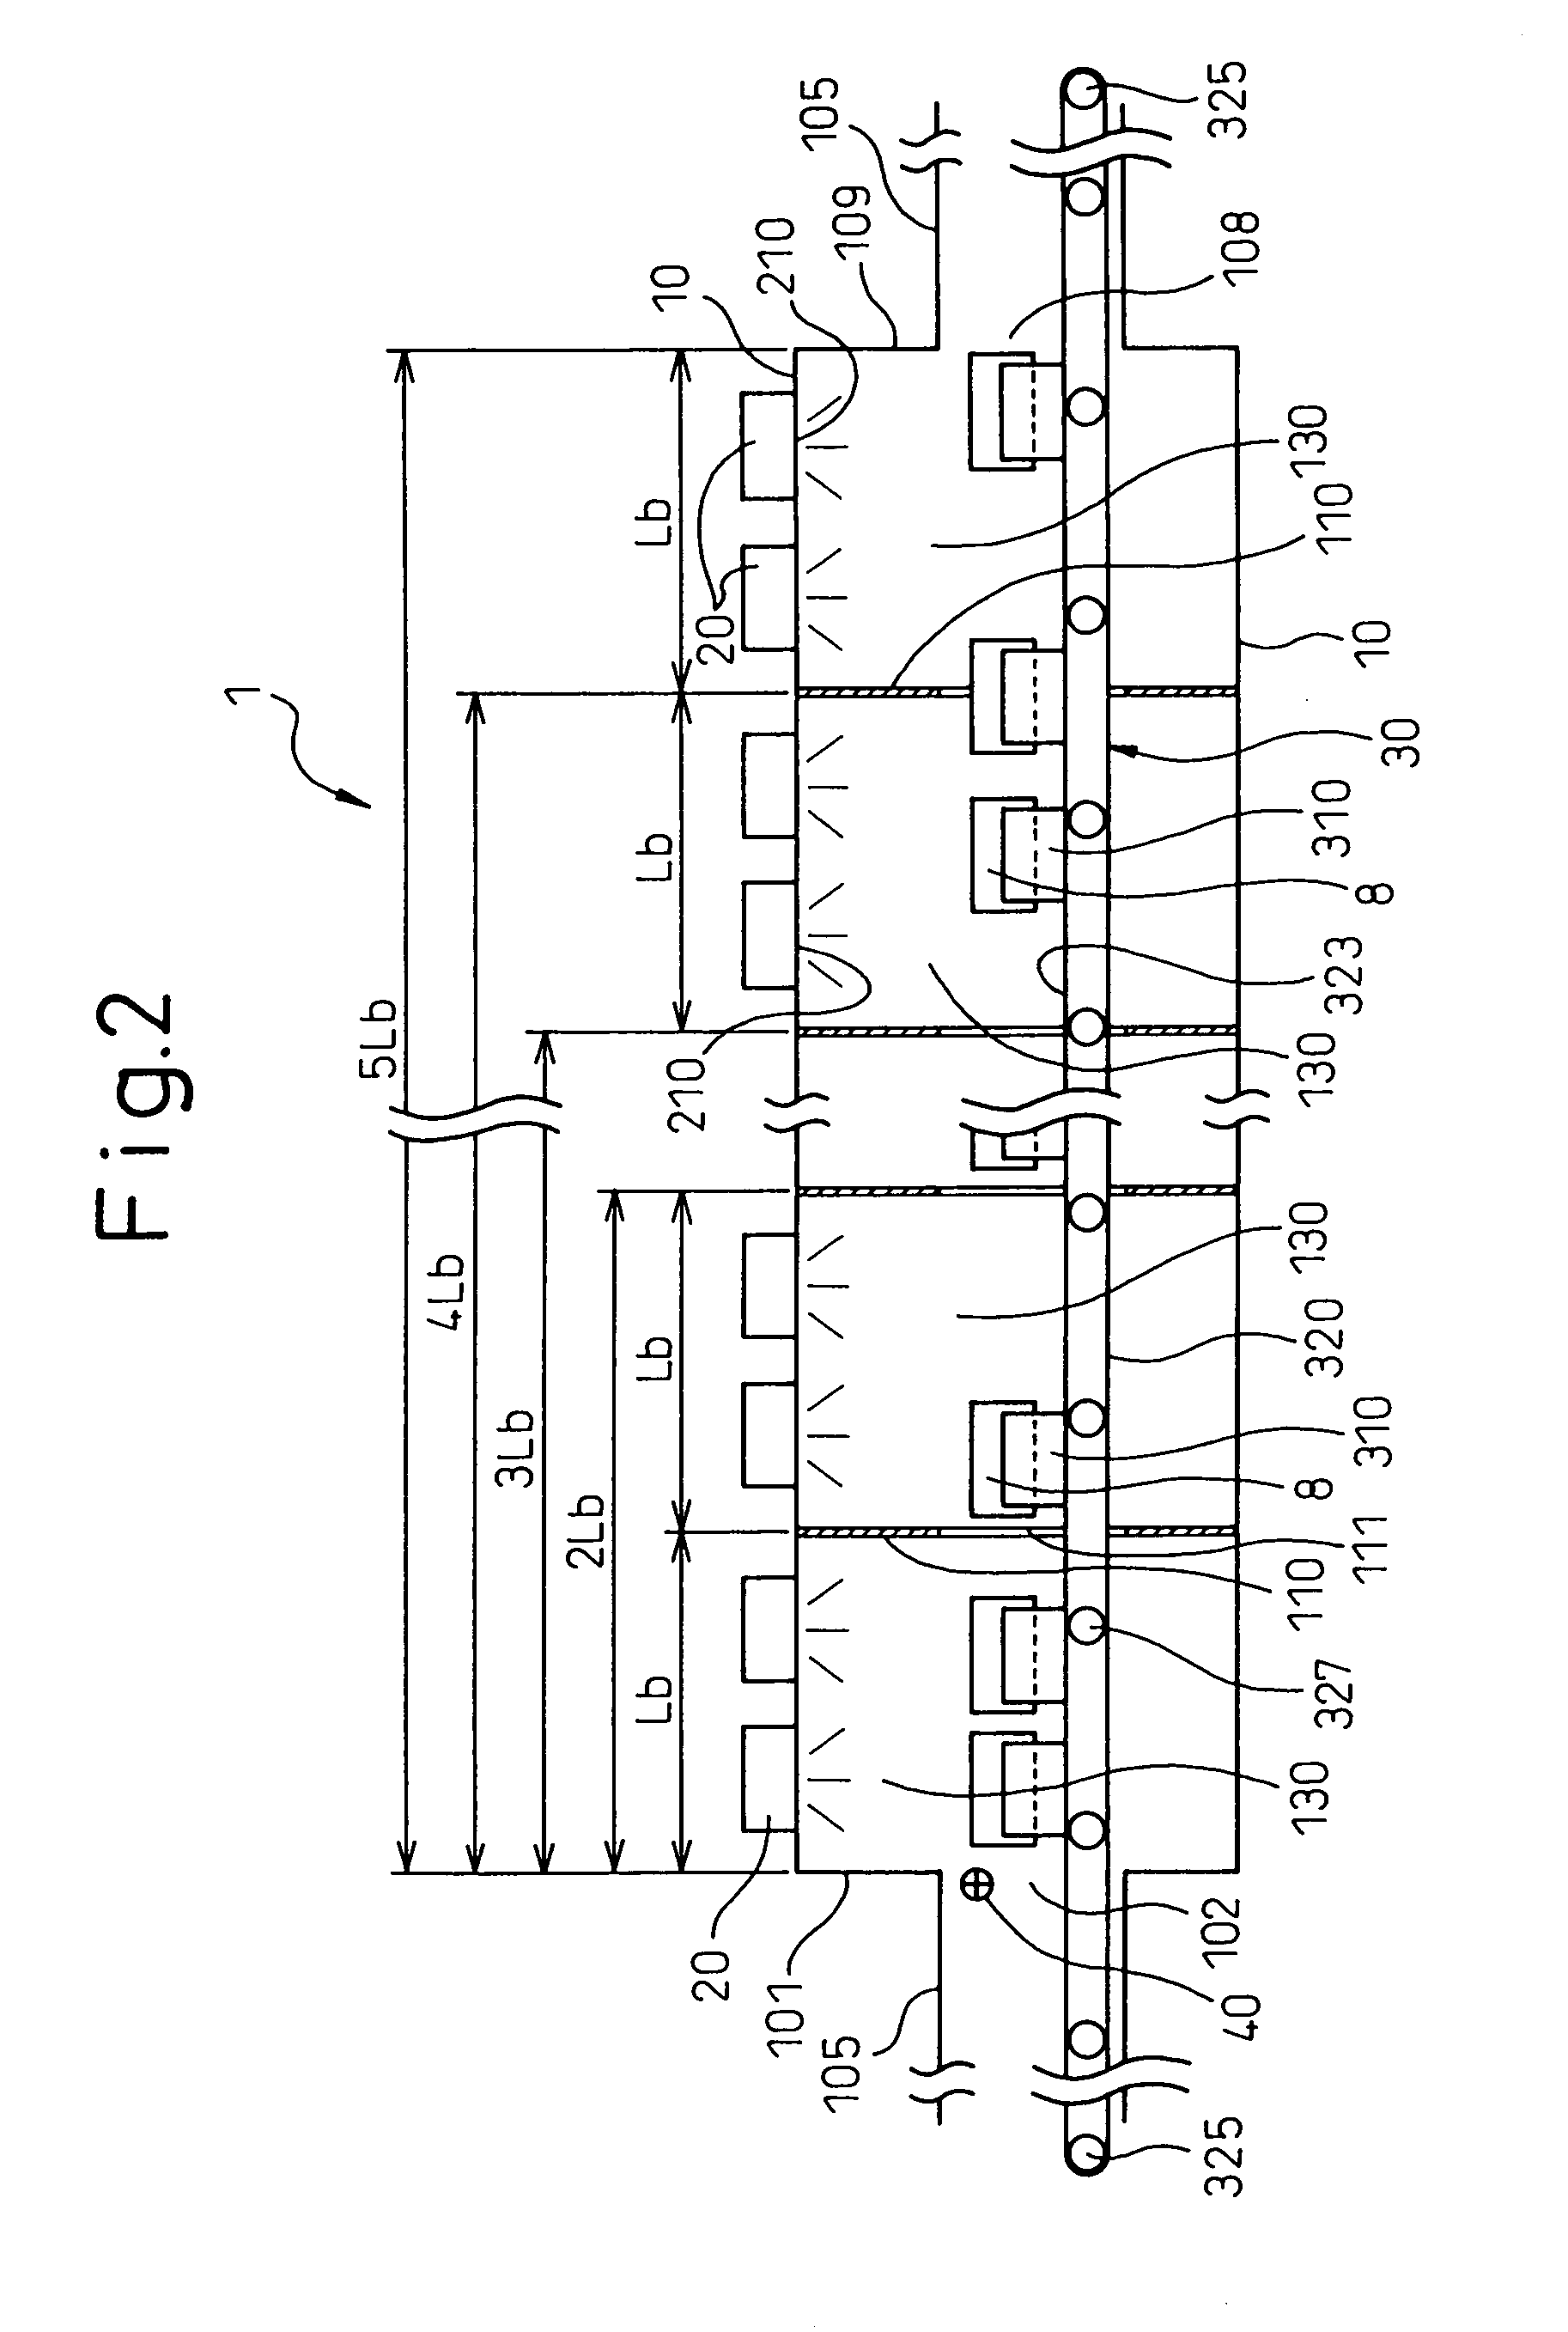 Apparatus for drying ceramic molded articles using microwave energy